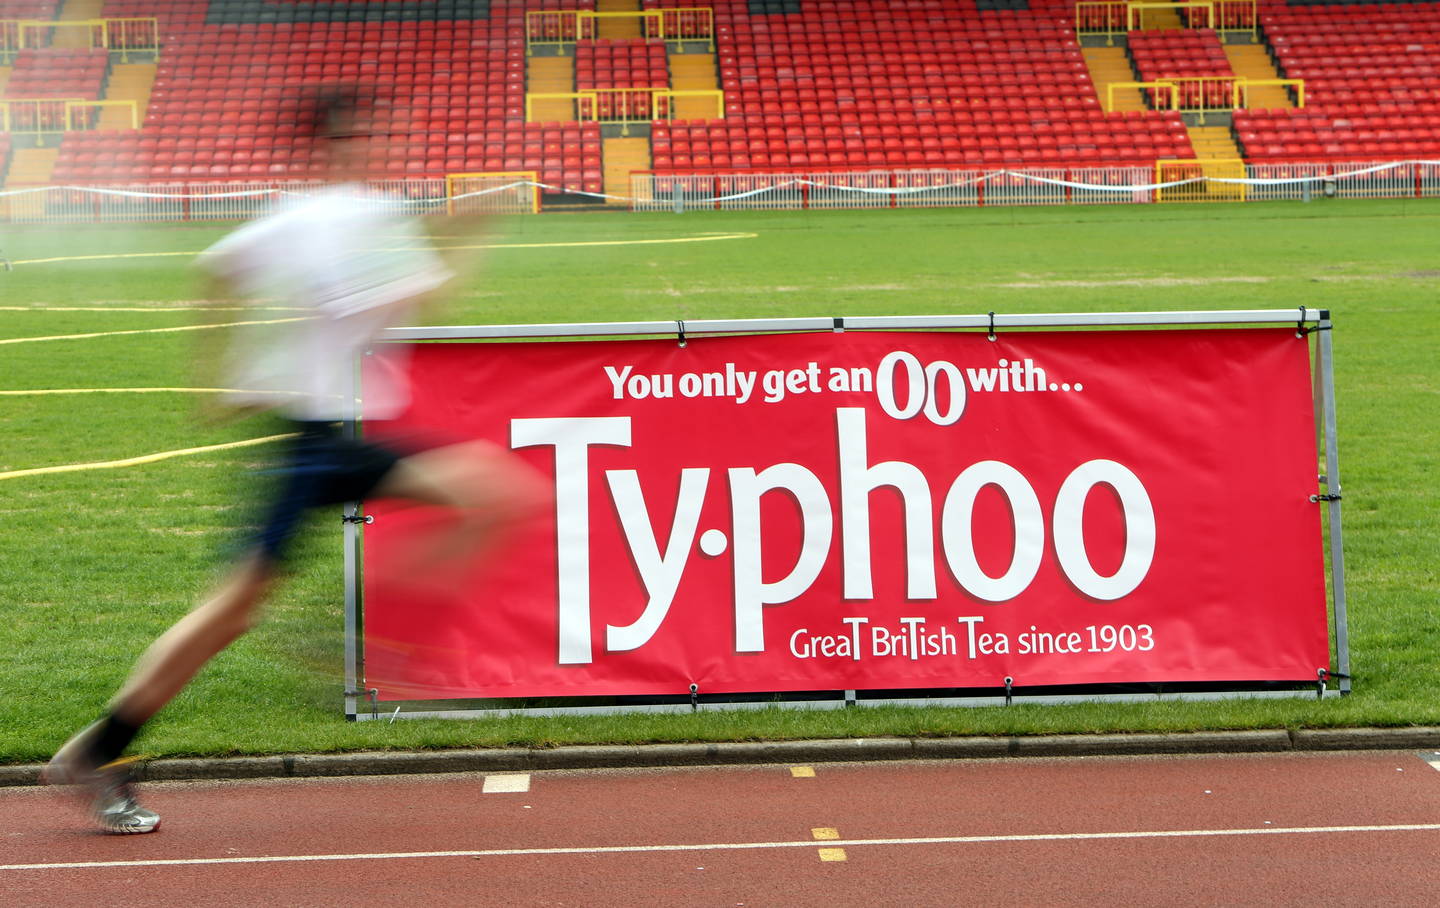 Boy running with Typhoo branding on the track